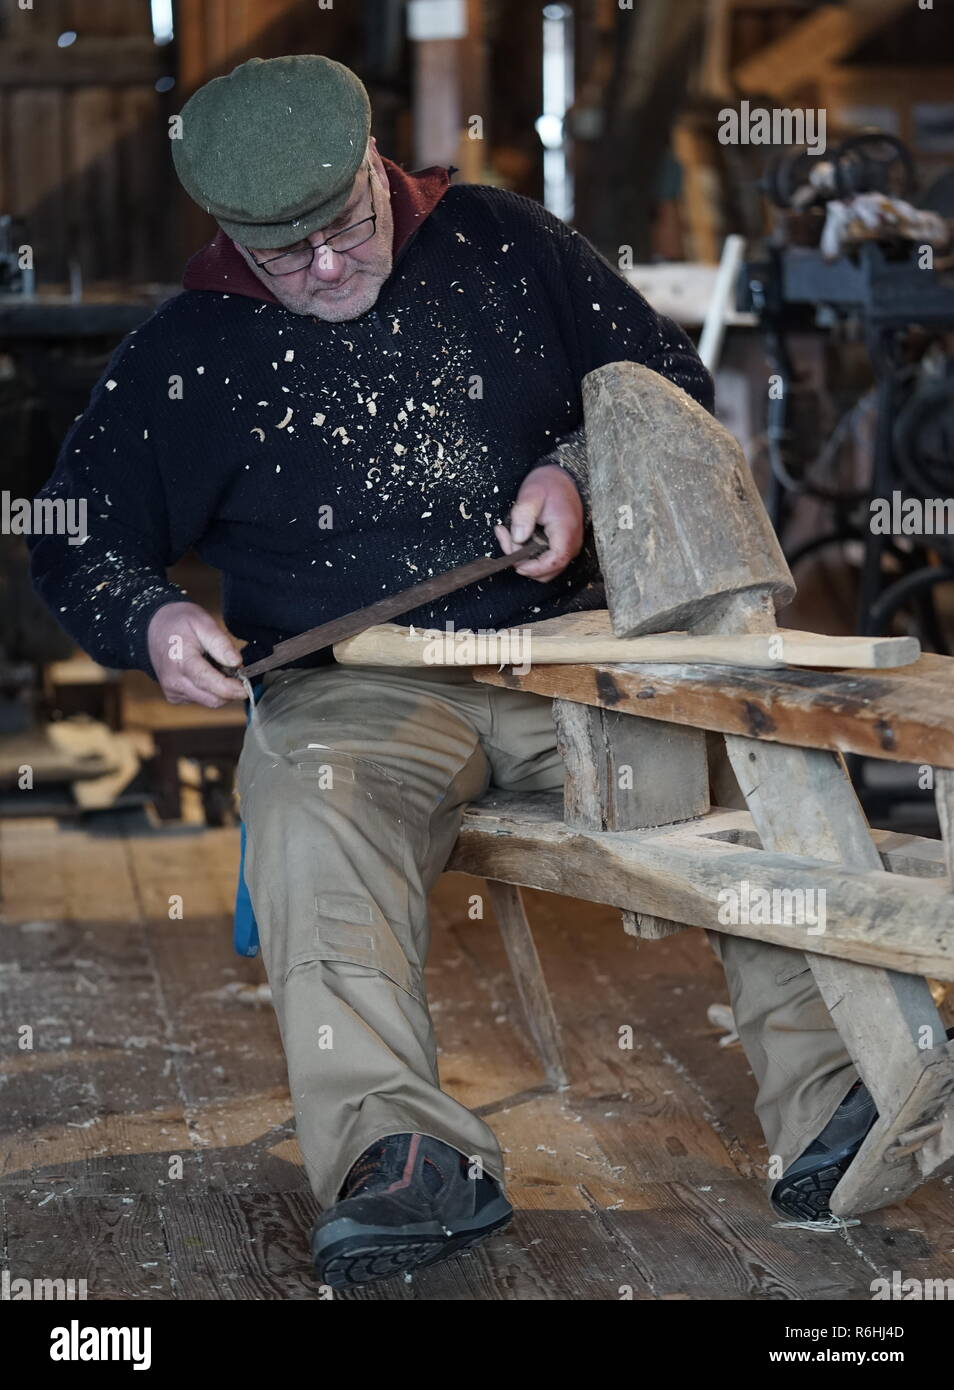 mature adult man works on clapboard an ax-handle Stock Photo